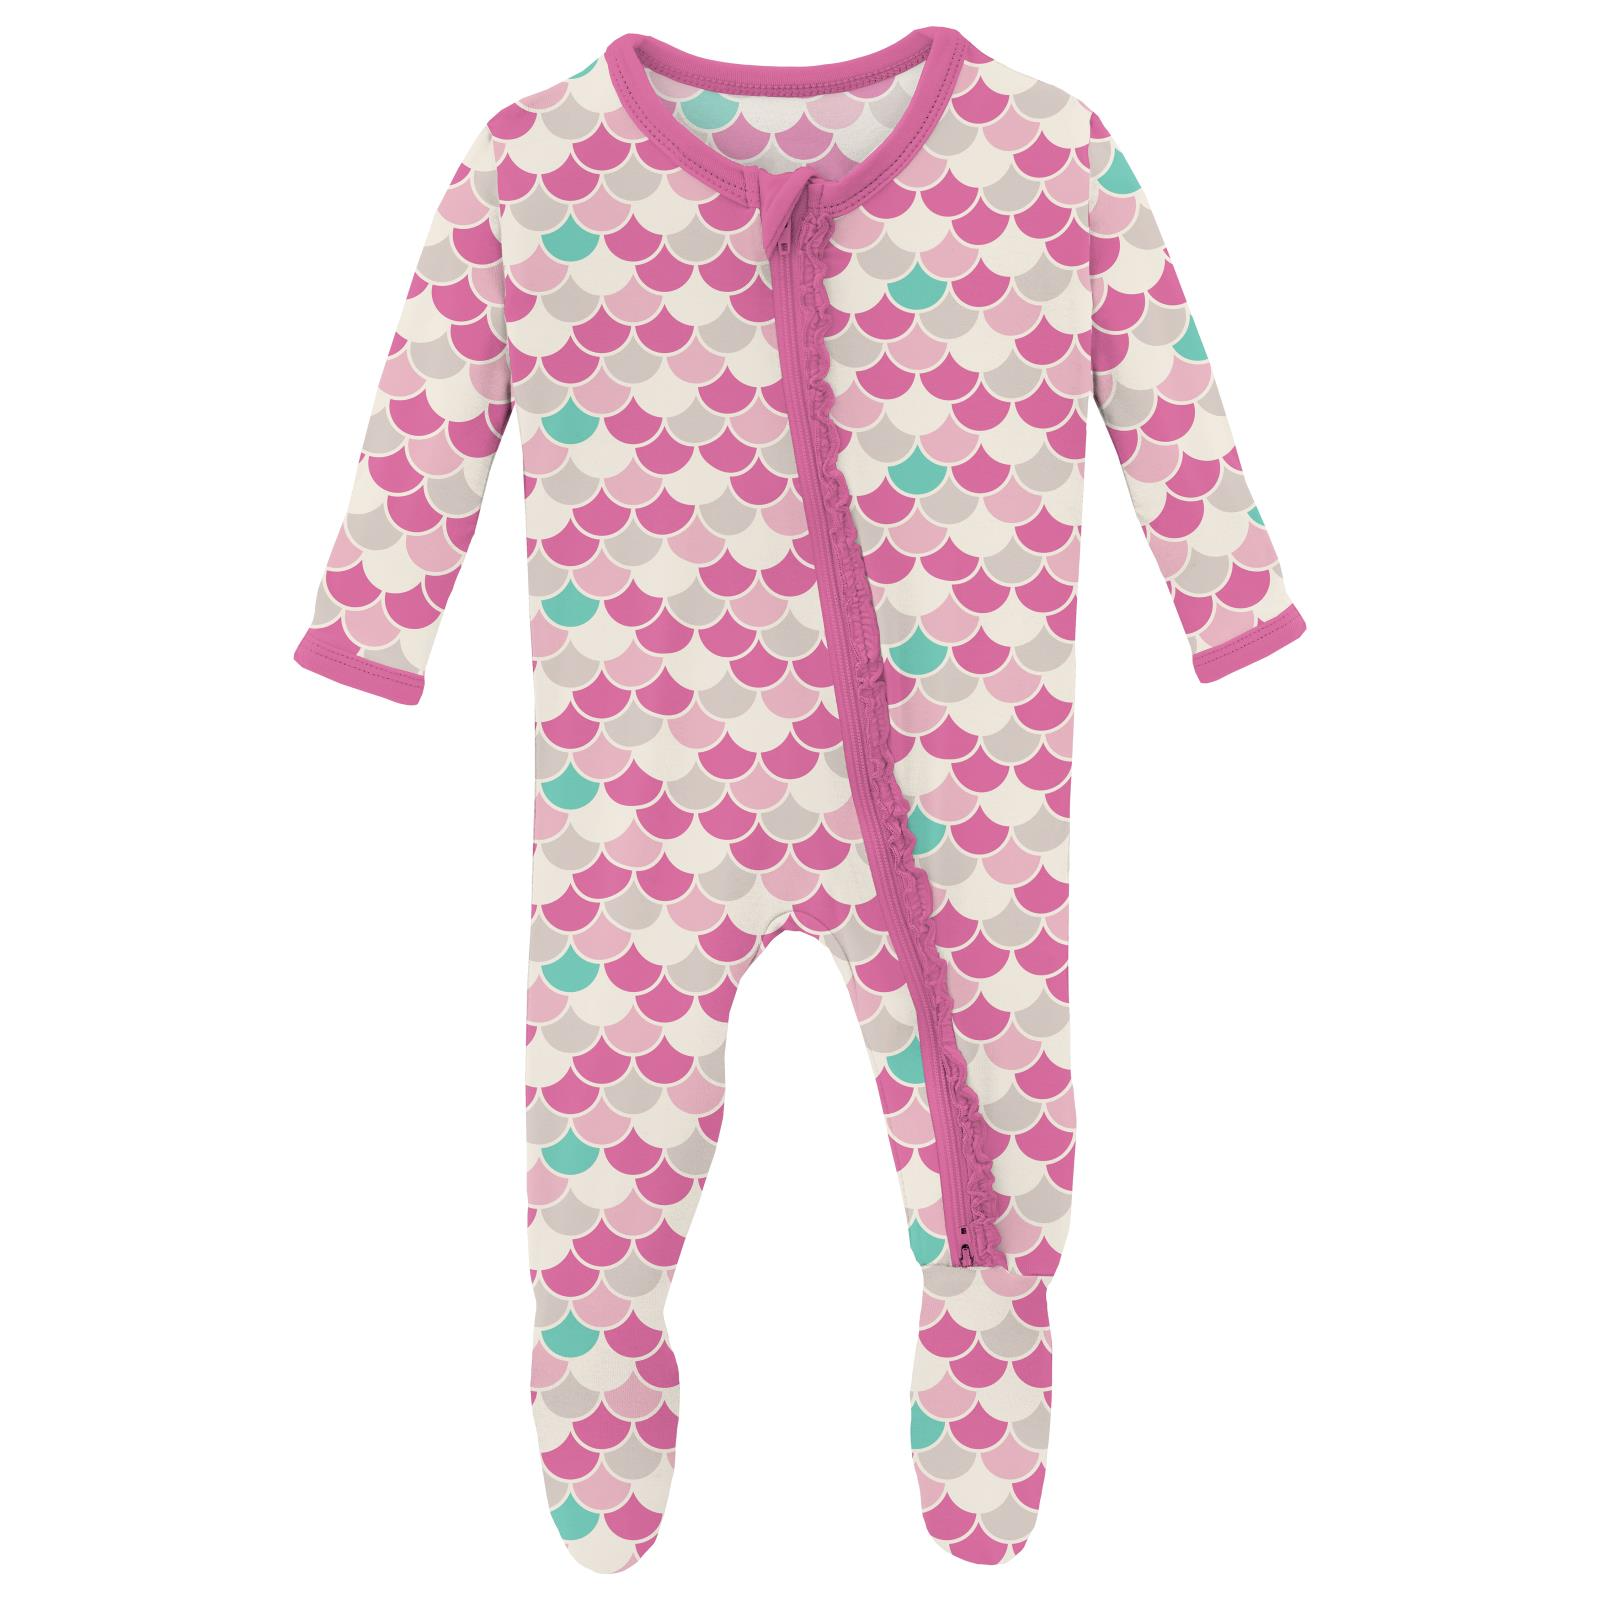 Kickee Pants Print Muffin Ruffle Footie with 2 Way Zipper Tulip Scales